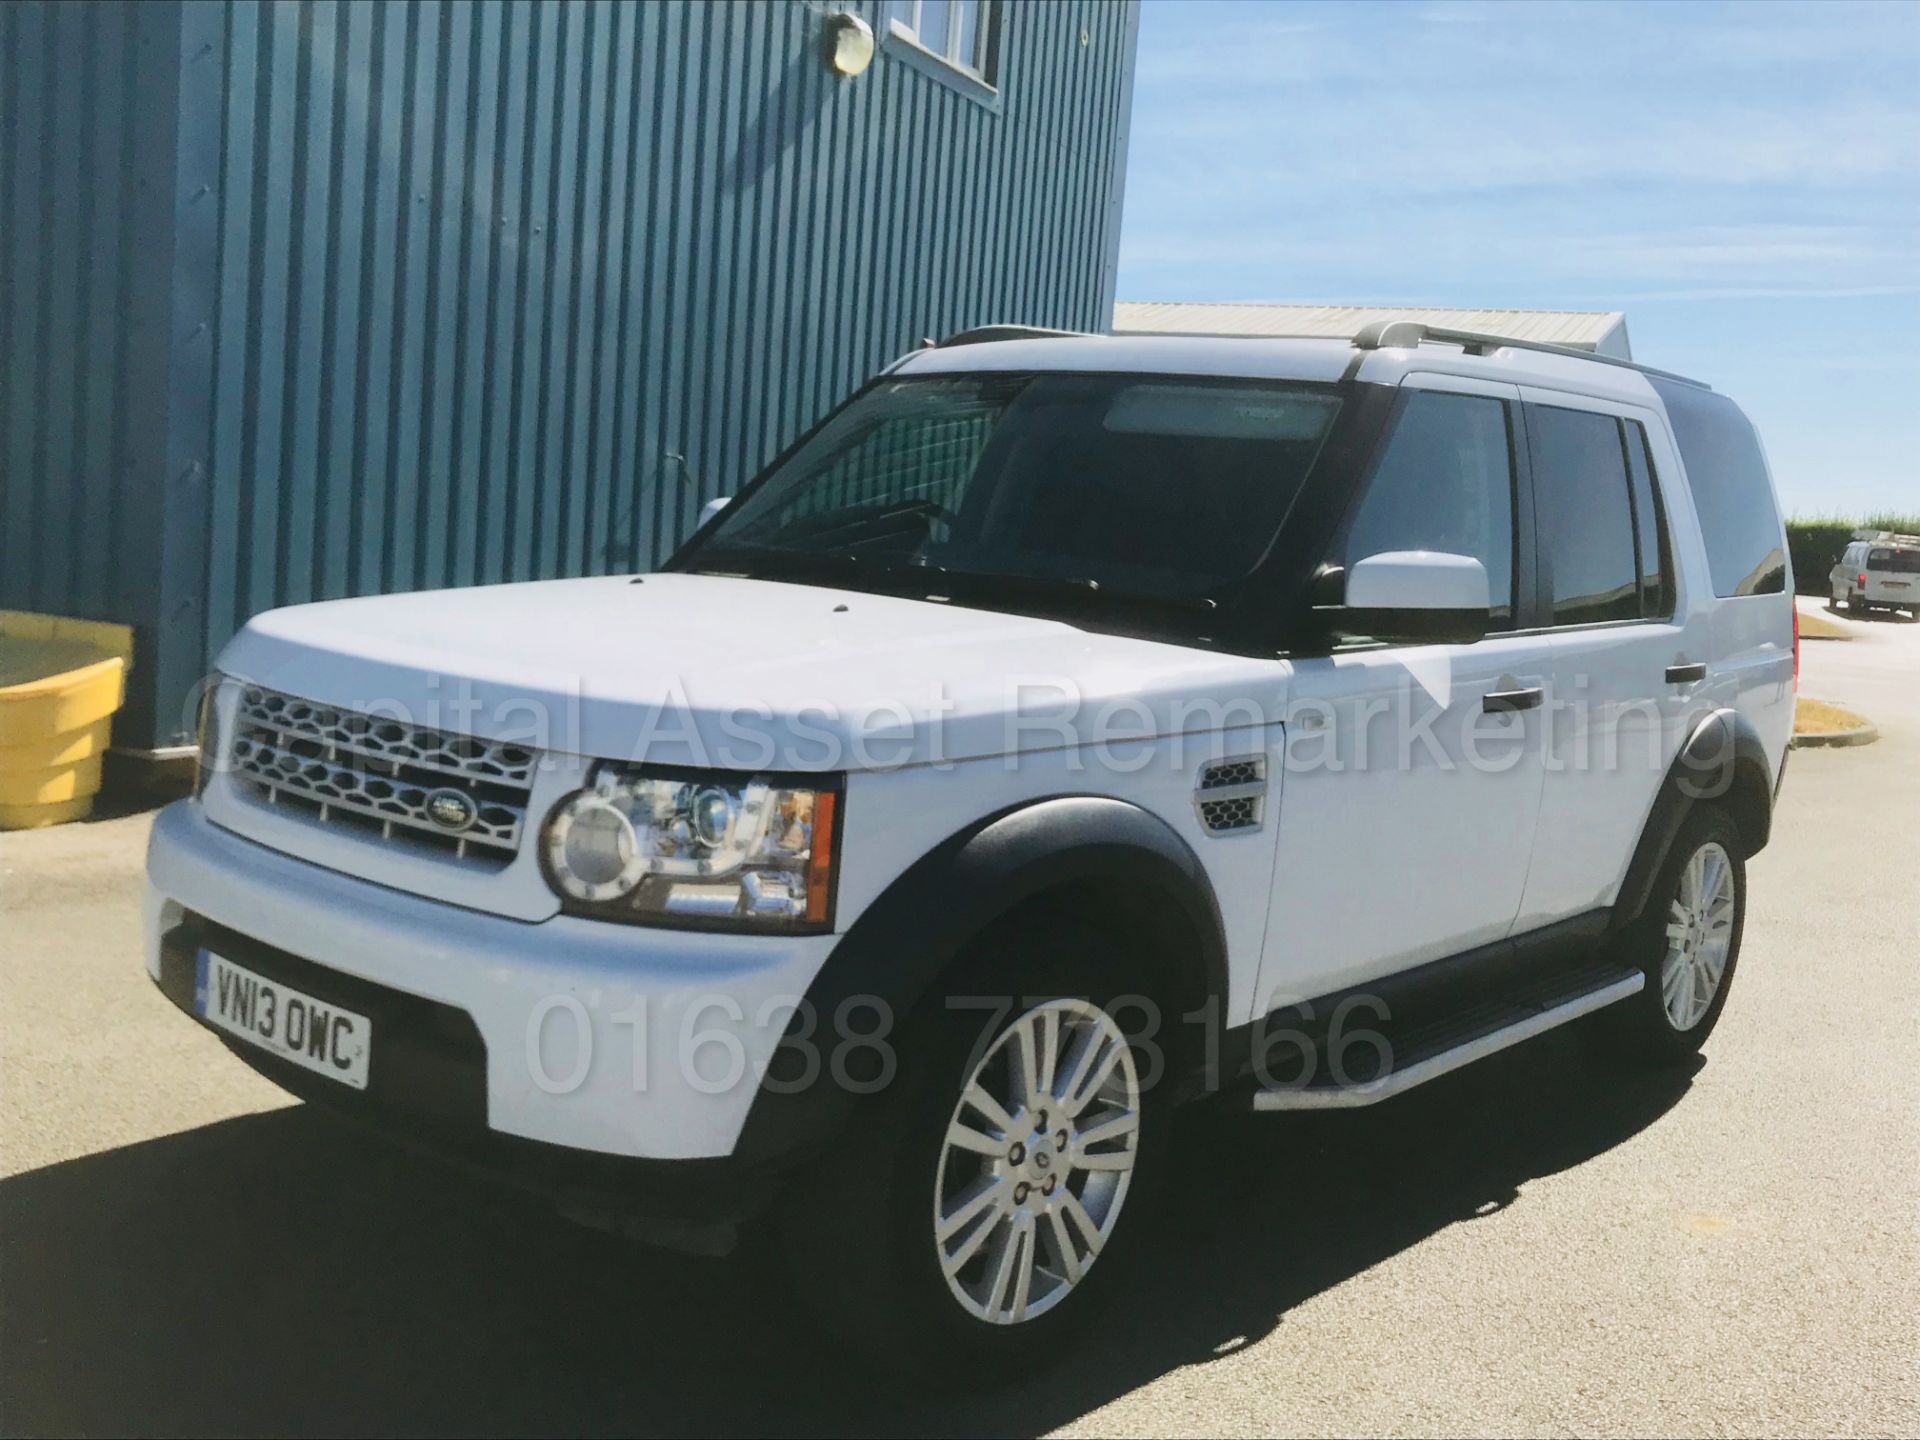 (On Sale) LAND ROVER DISCOVERY 4 **COMMERCIAL VAN**(2013 - 13 REG) '3.0 TDV6 - 210 BHP - AUTO' - Image 6 of 38